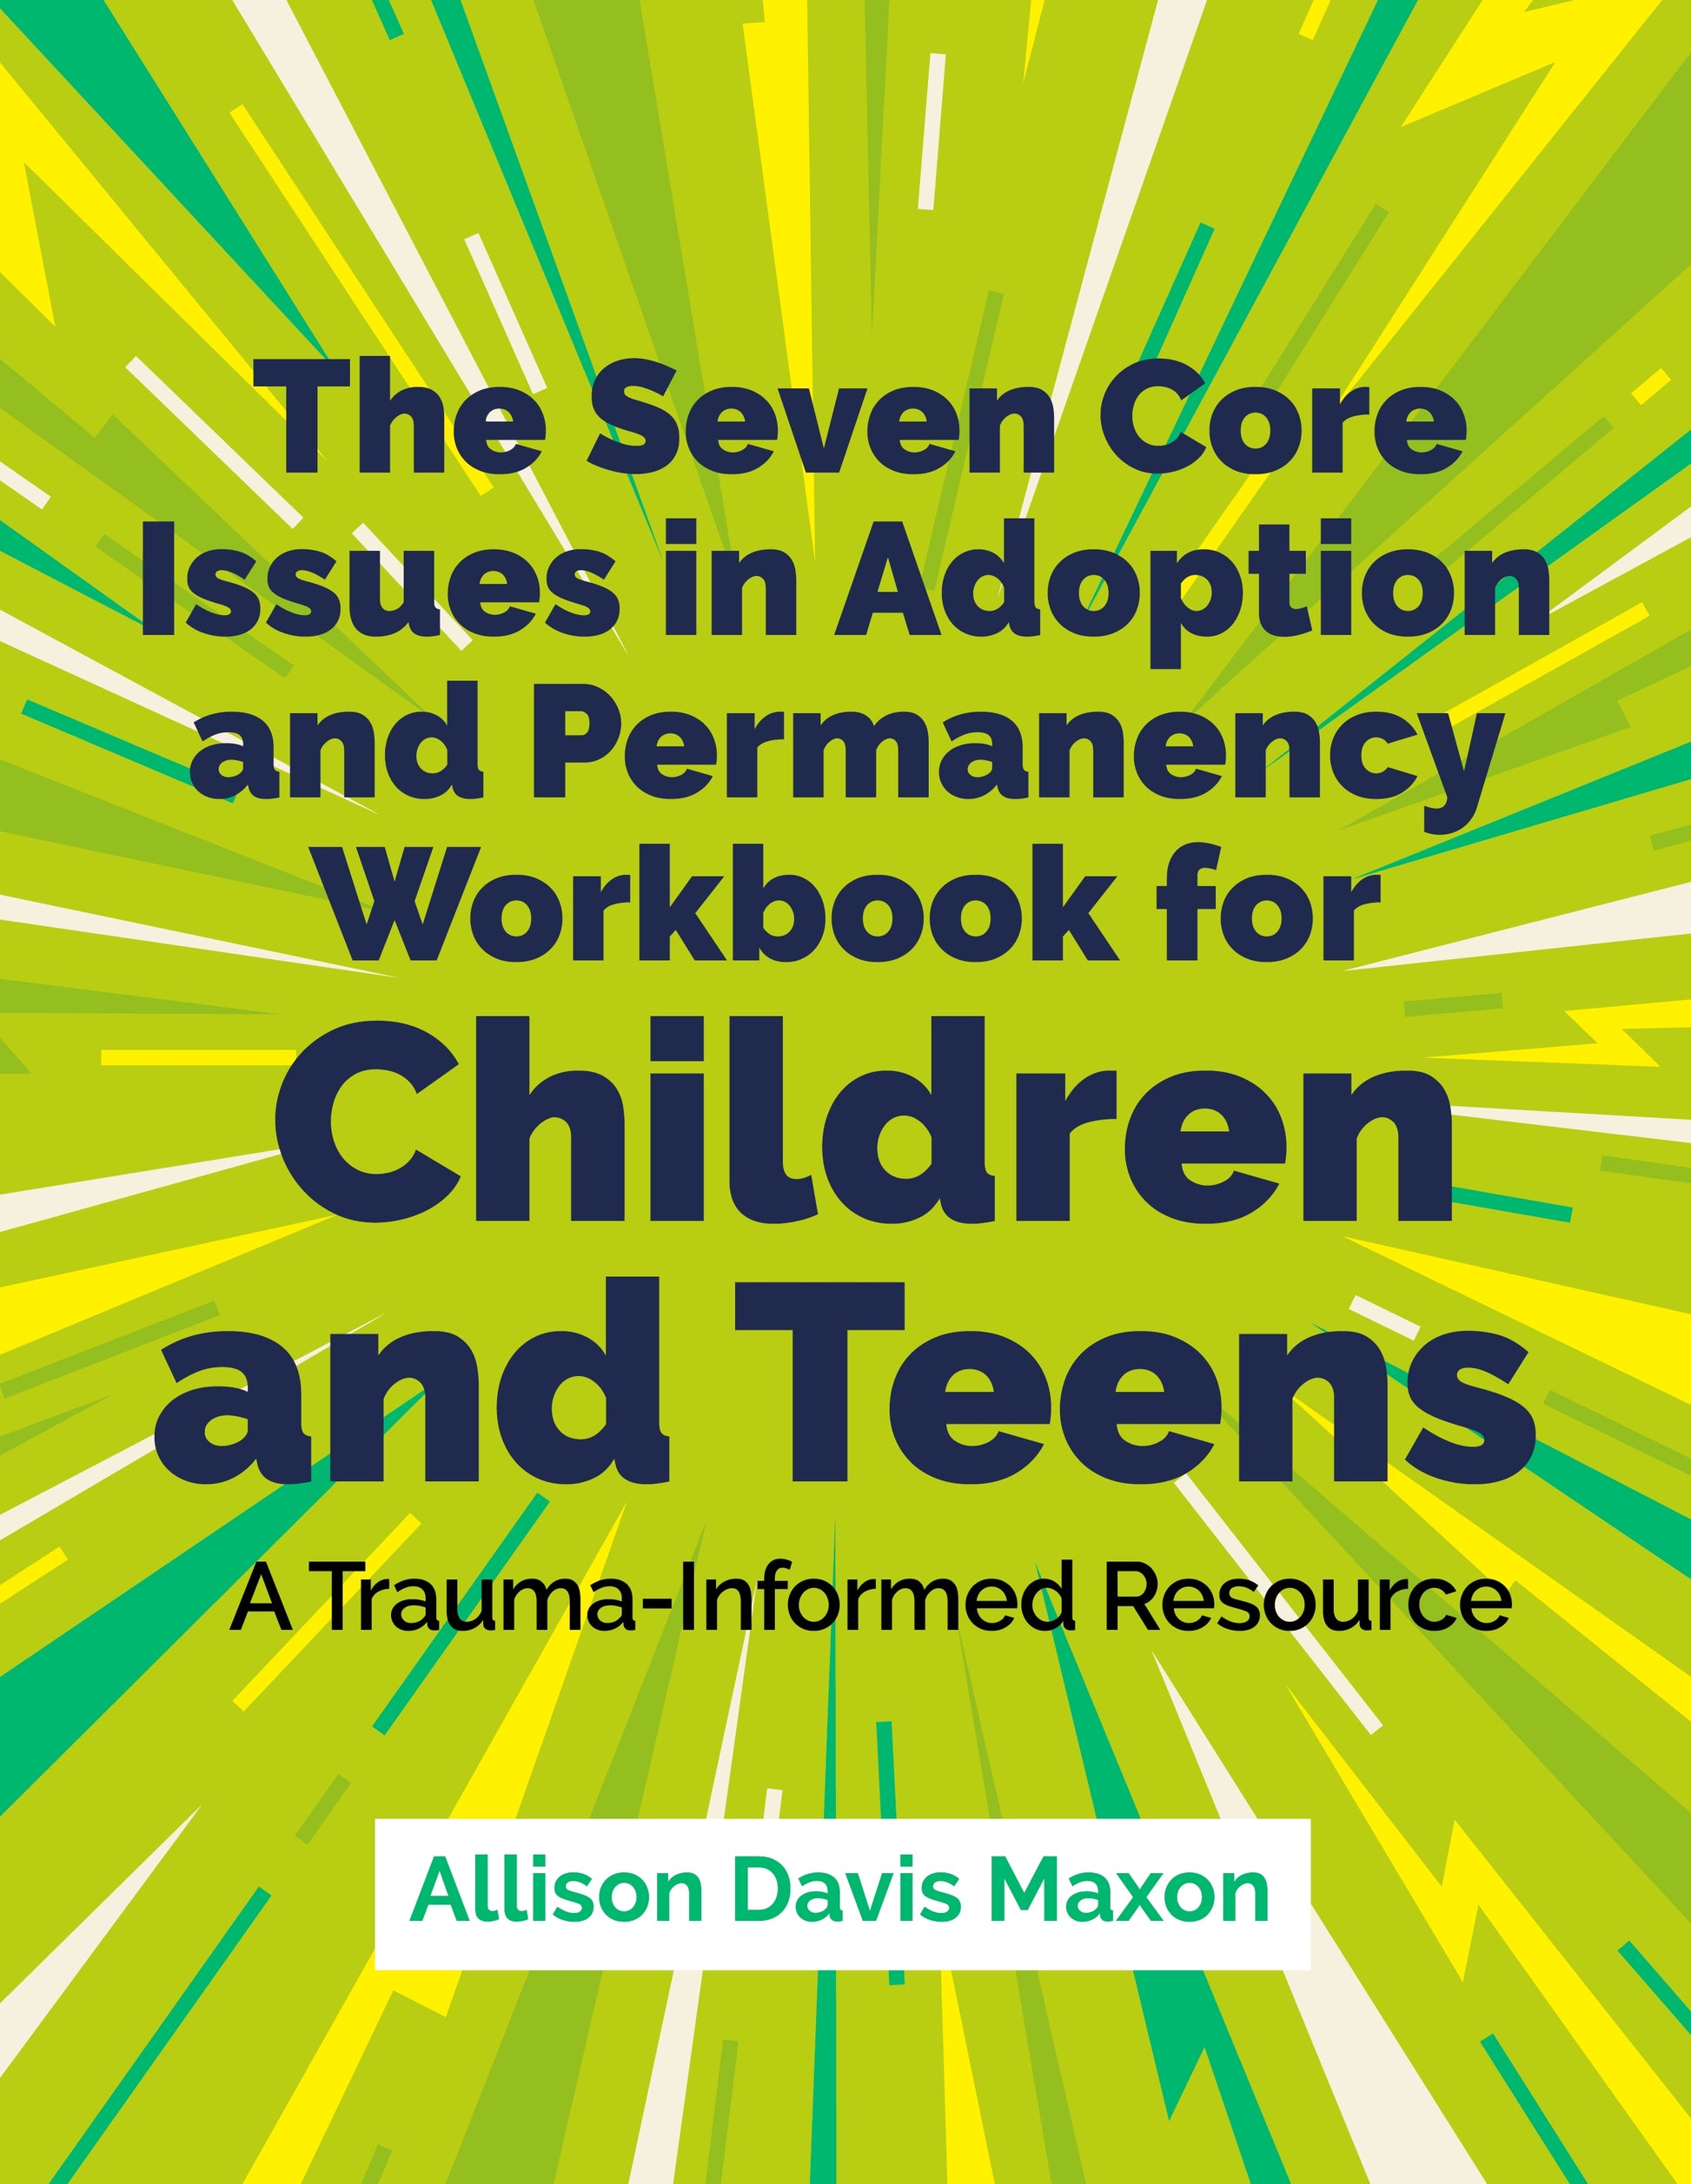 The Seven Core Issues in Adoption and Permanency Workbook for Children and Teens by Allison Davis Maxon